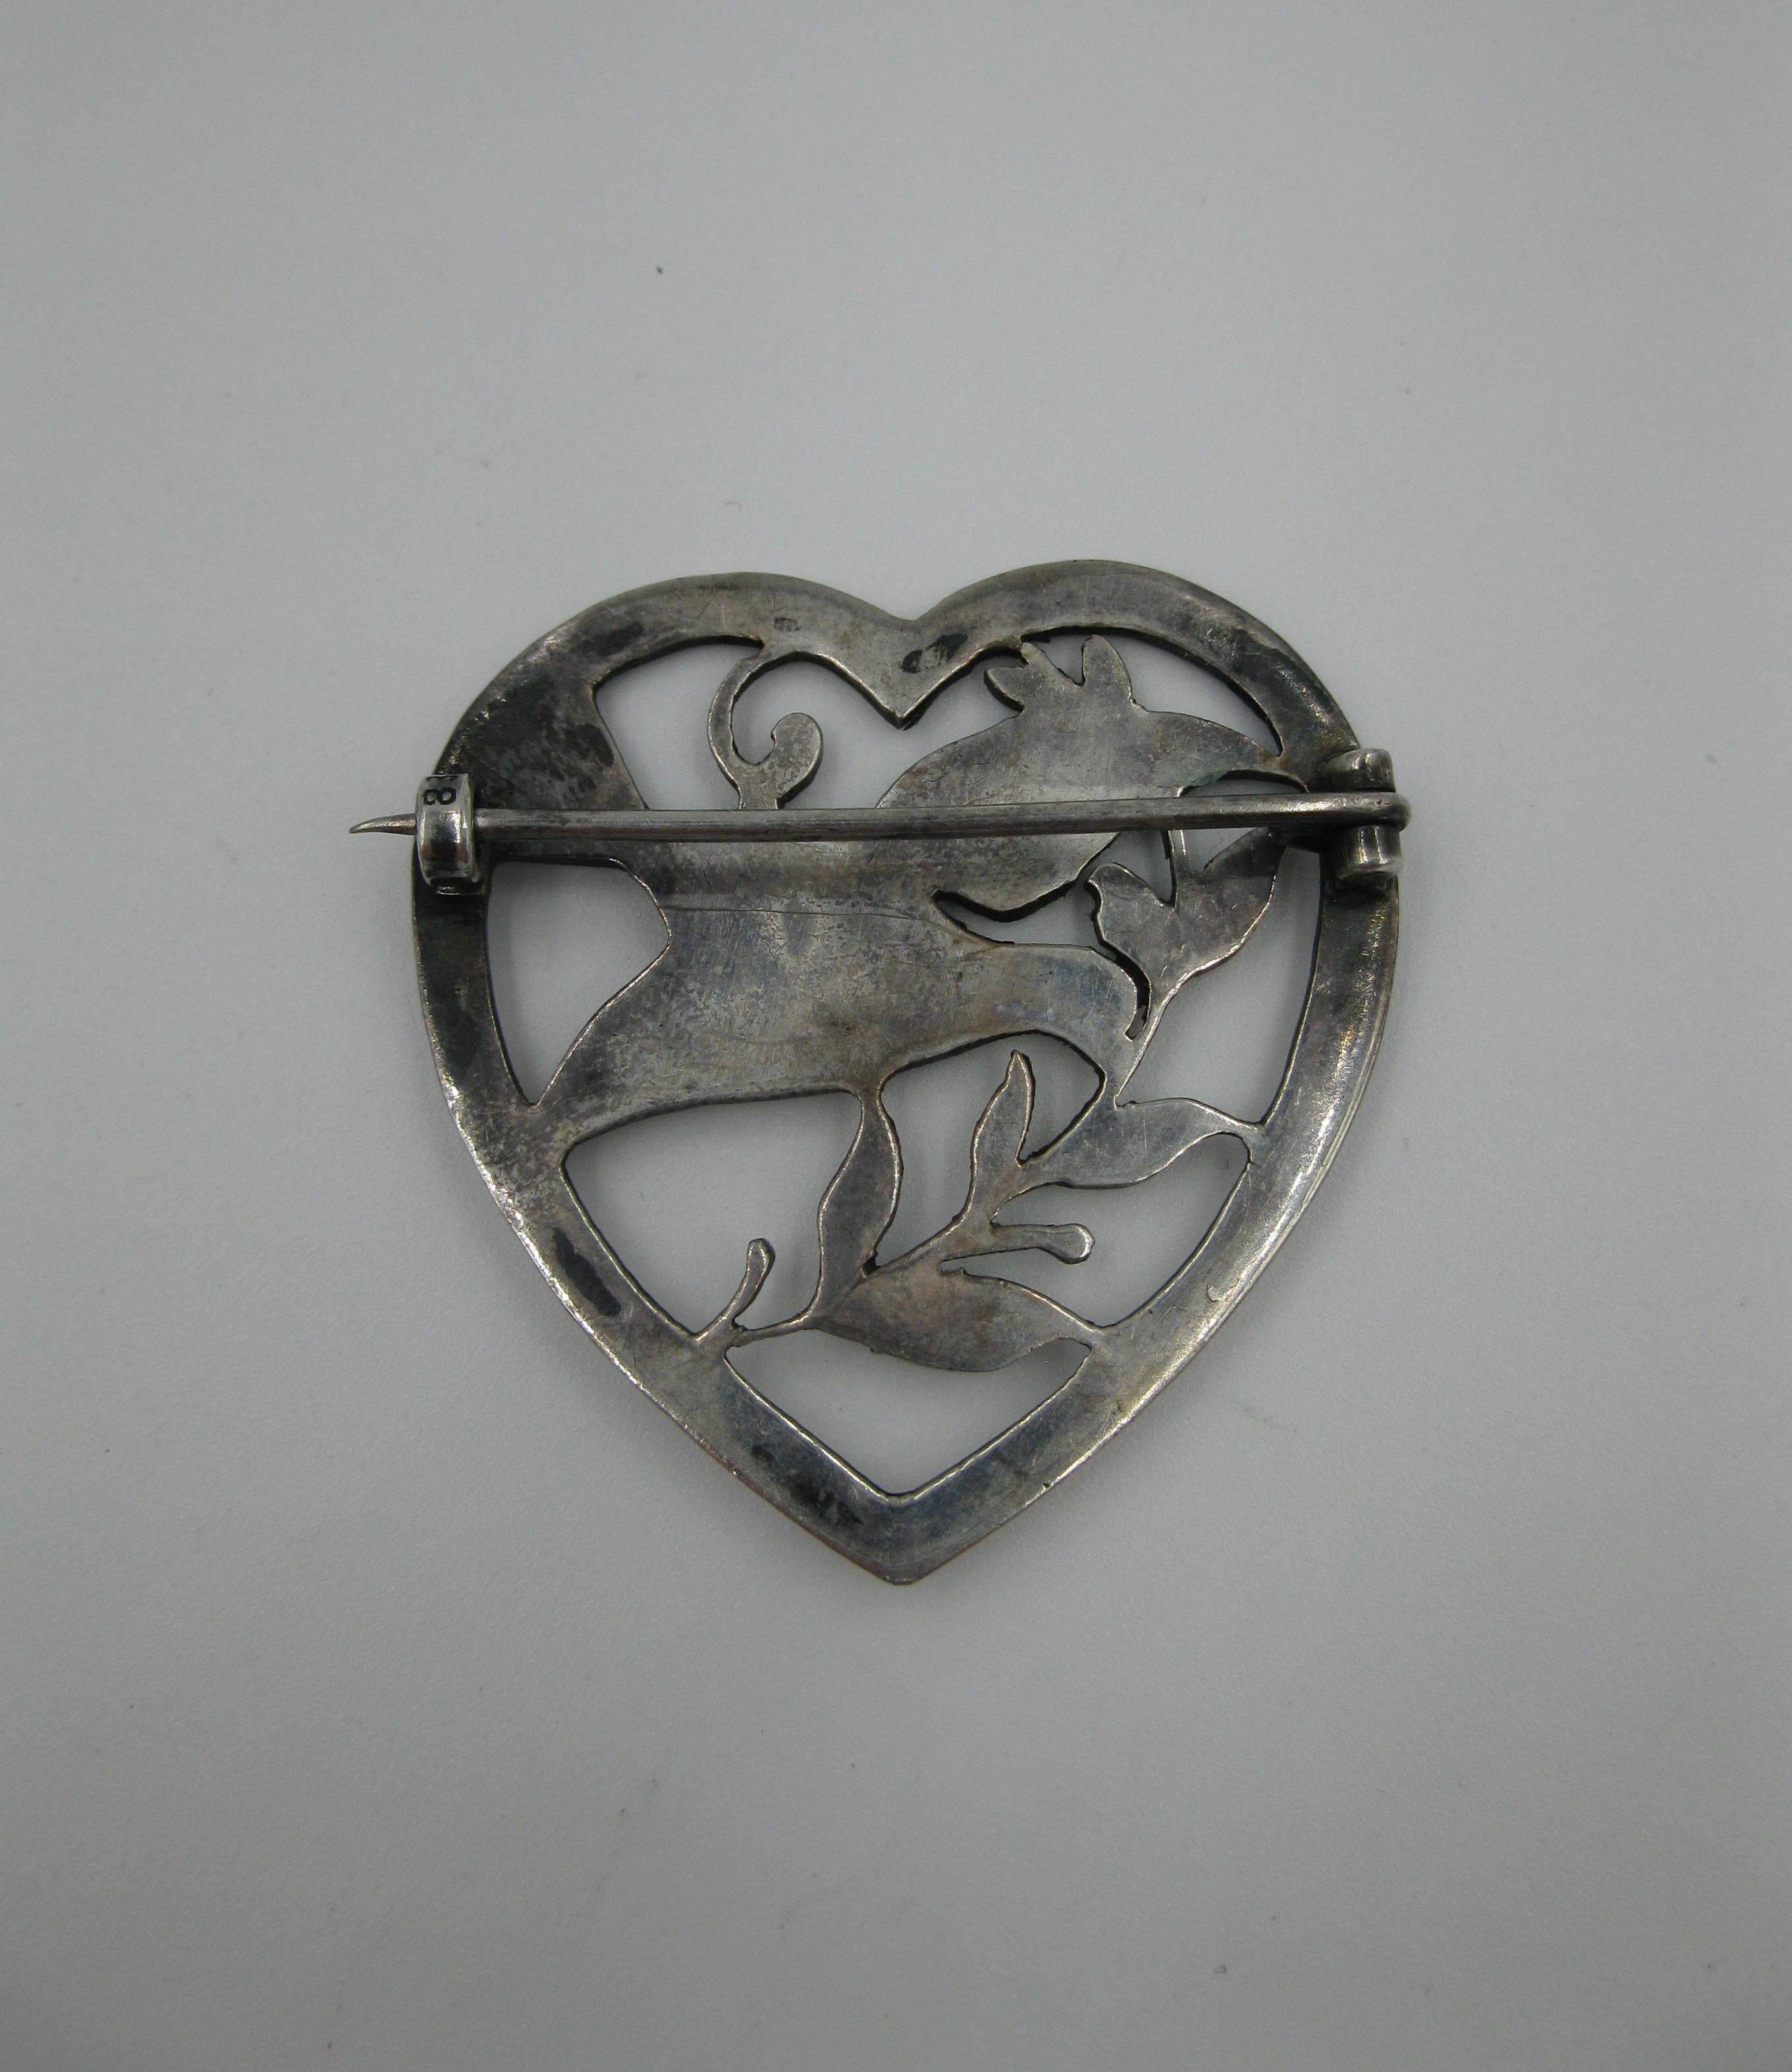 A WONDERFUL MID-CENTURY MODERN BIRD, DOVE IN A HEART BROOCH IN 830 SILVER, MOST LIKELY SCANDINAVIAN, CONTINENTAL - A CLASSIC.
With very beautiful mid-century modern open work design in 830 silver.  It has an early C-clasp and may date from the 1920s